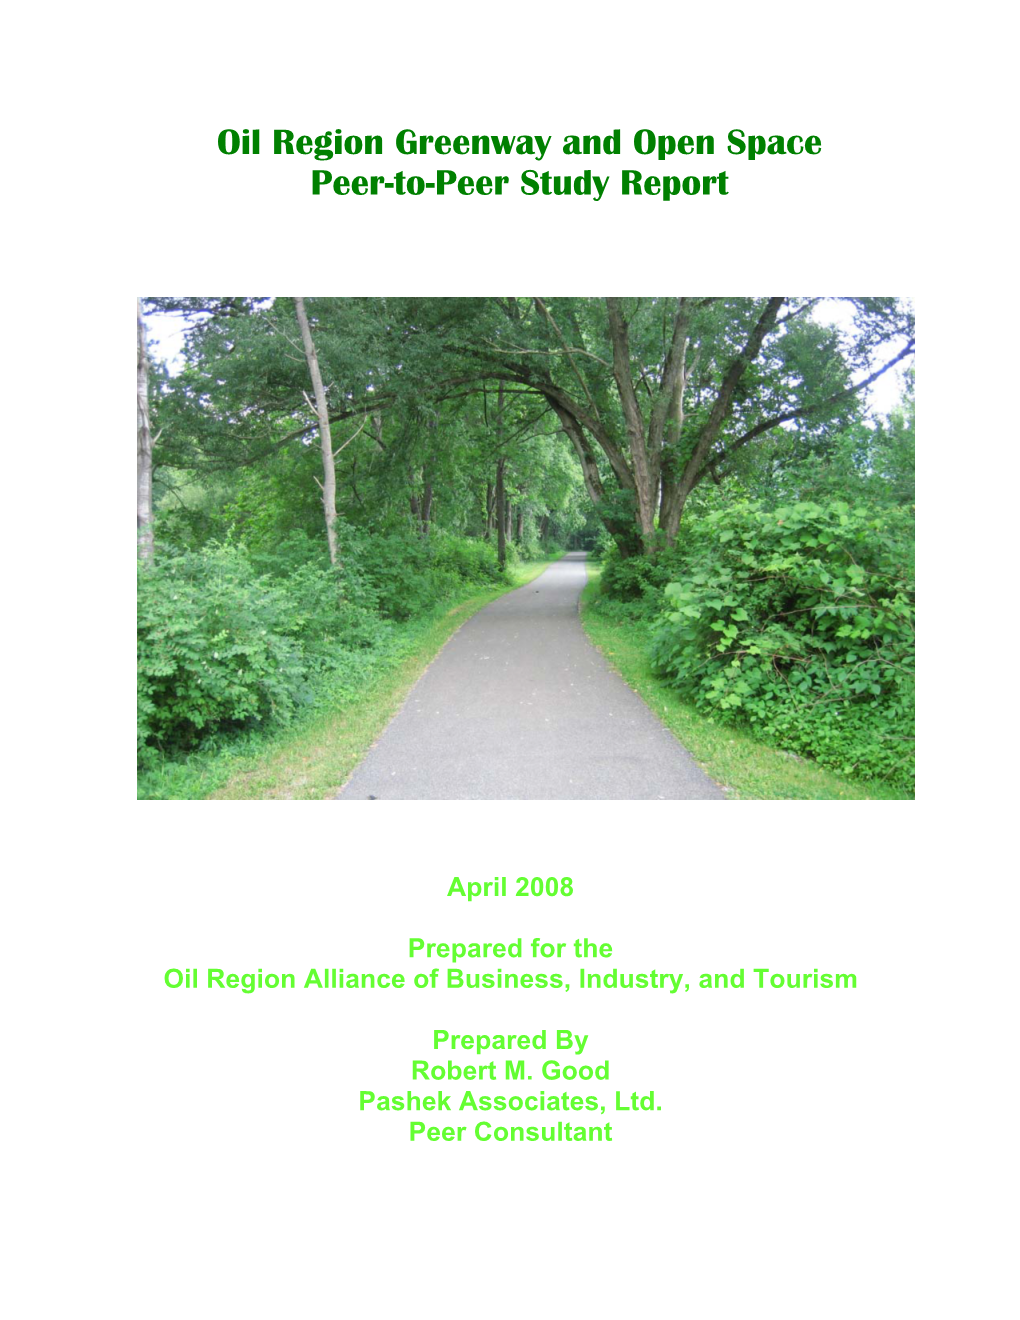 Oil Region Greenway and Open Space Peer-To-Peer Study Report